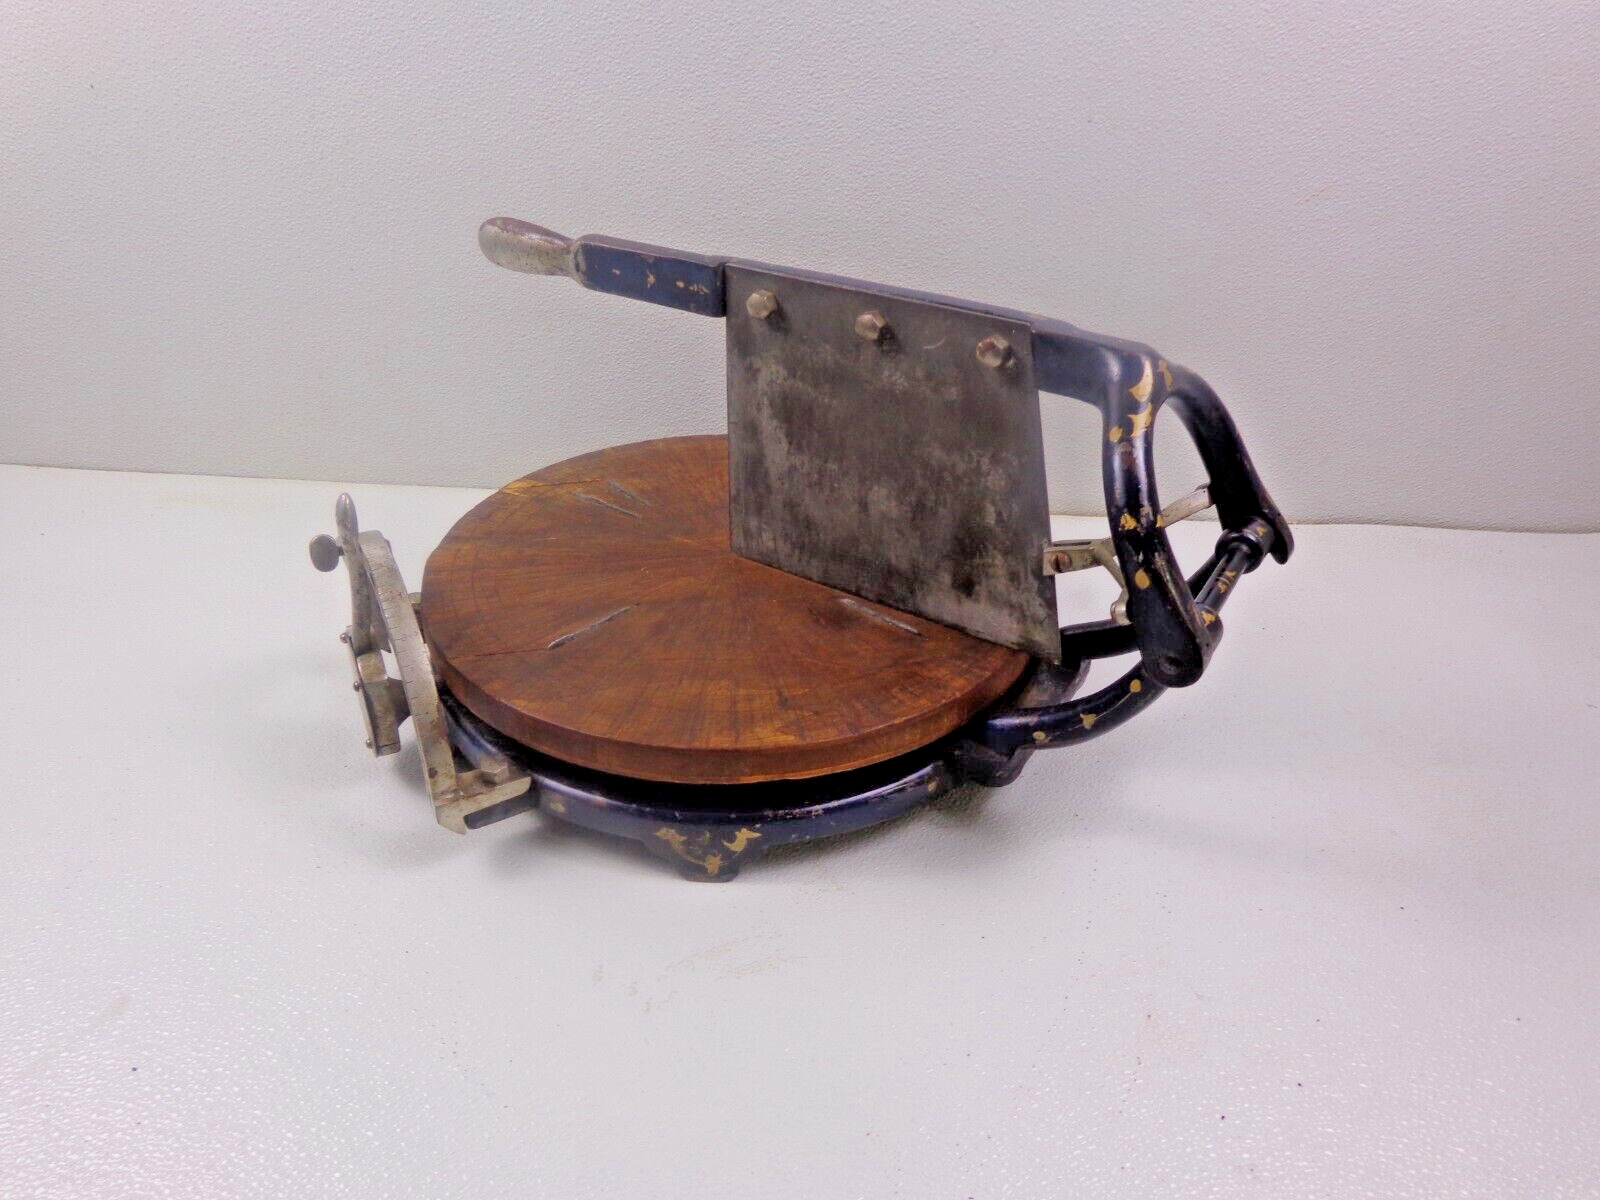 Antique Cheese Cutter by Computing Cheese Cutter Co. Used in General Stores/Deli